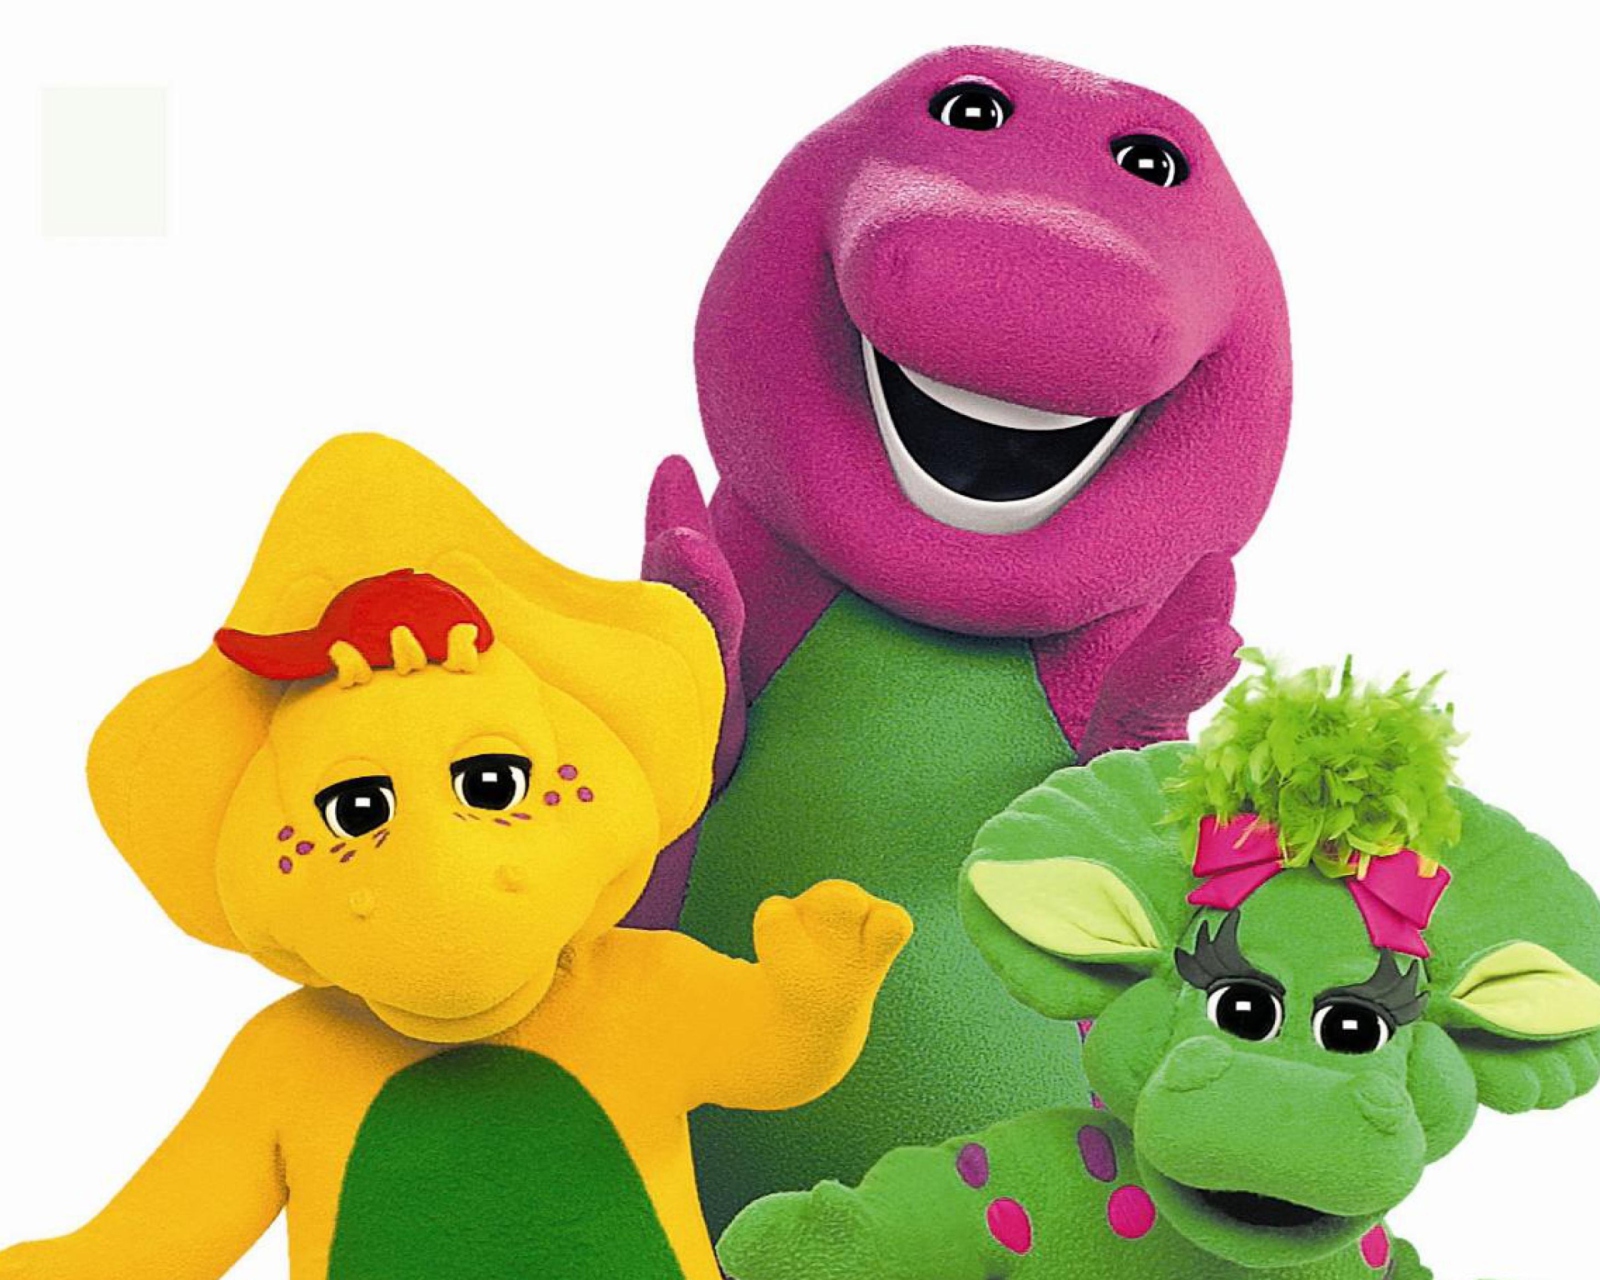 Barney And Friends wallpaper 1600x1280